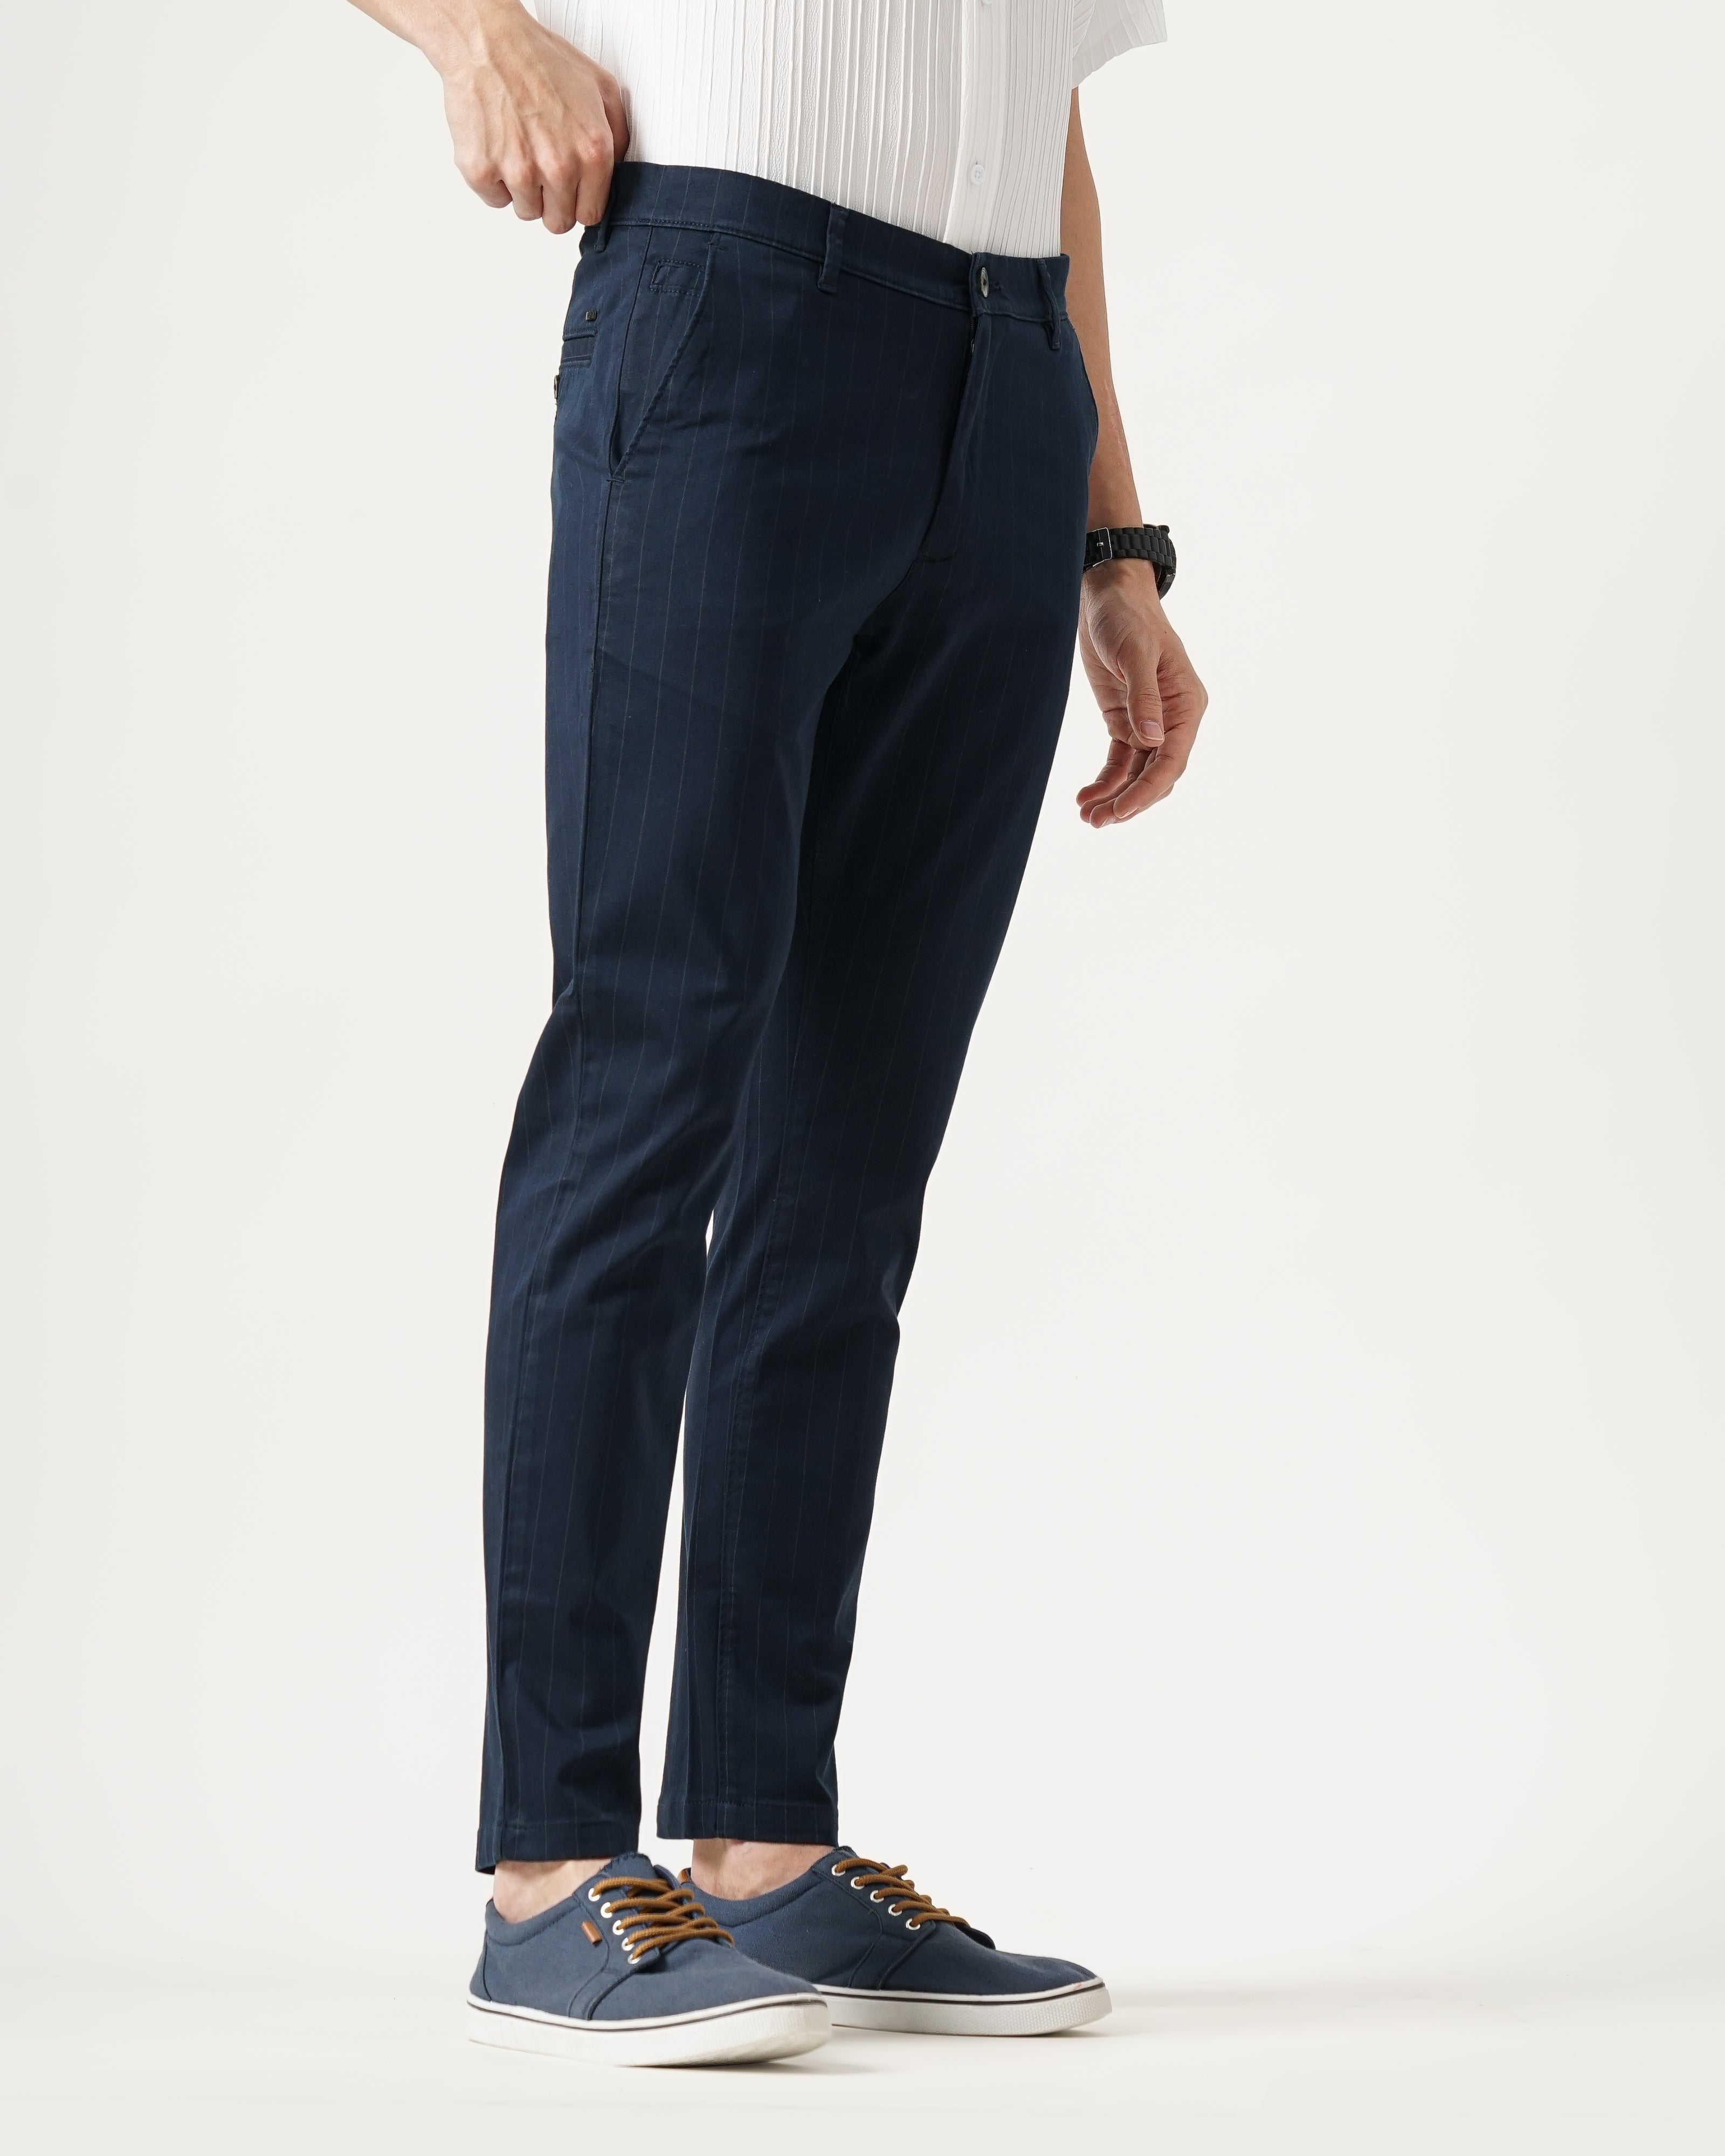 men's casual chinos